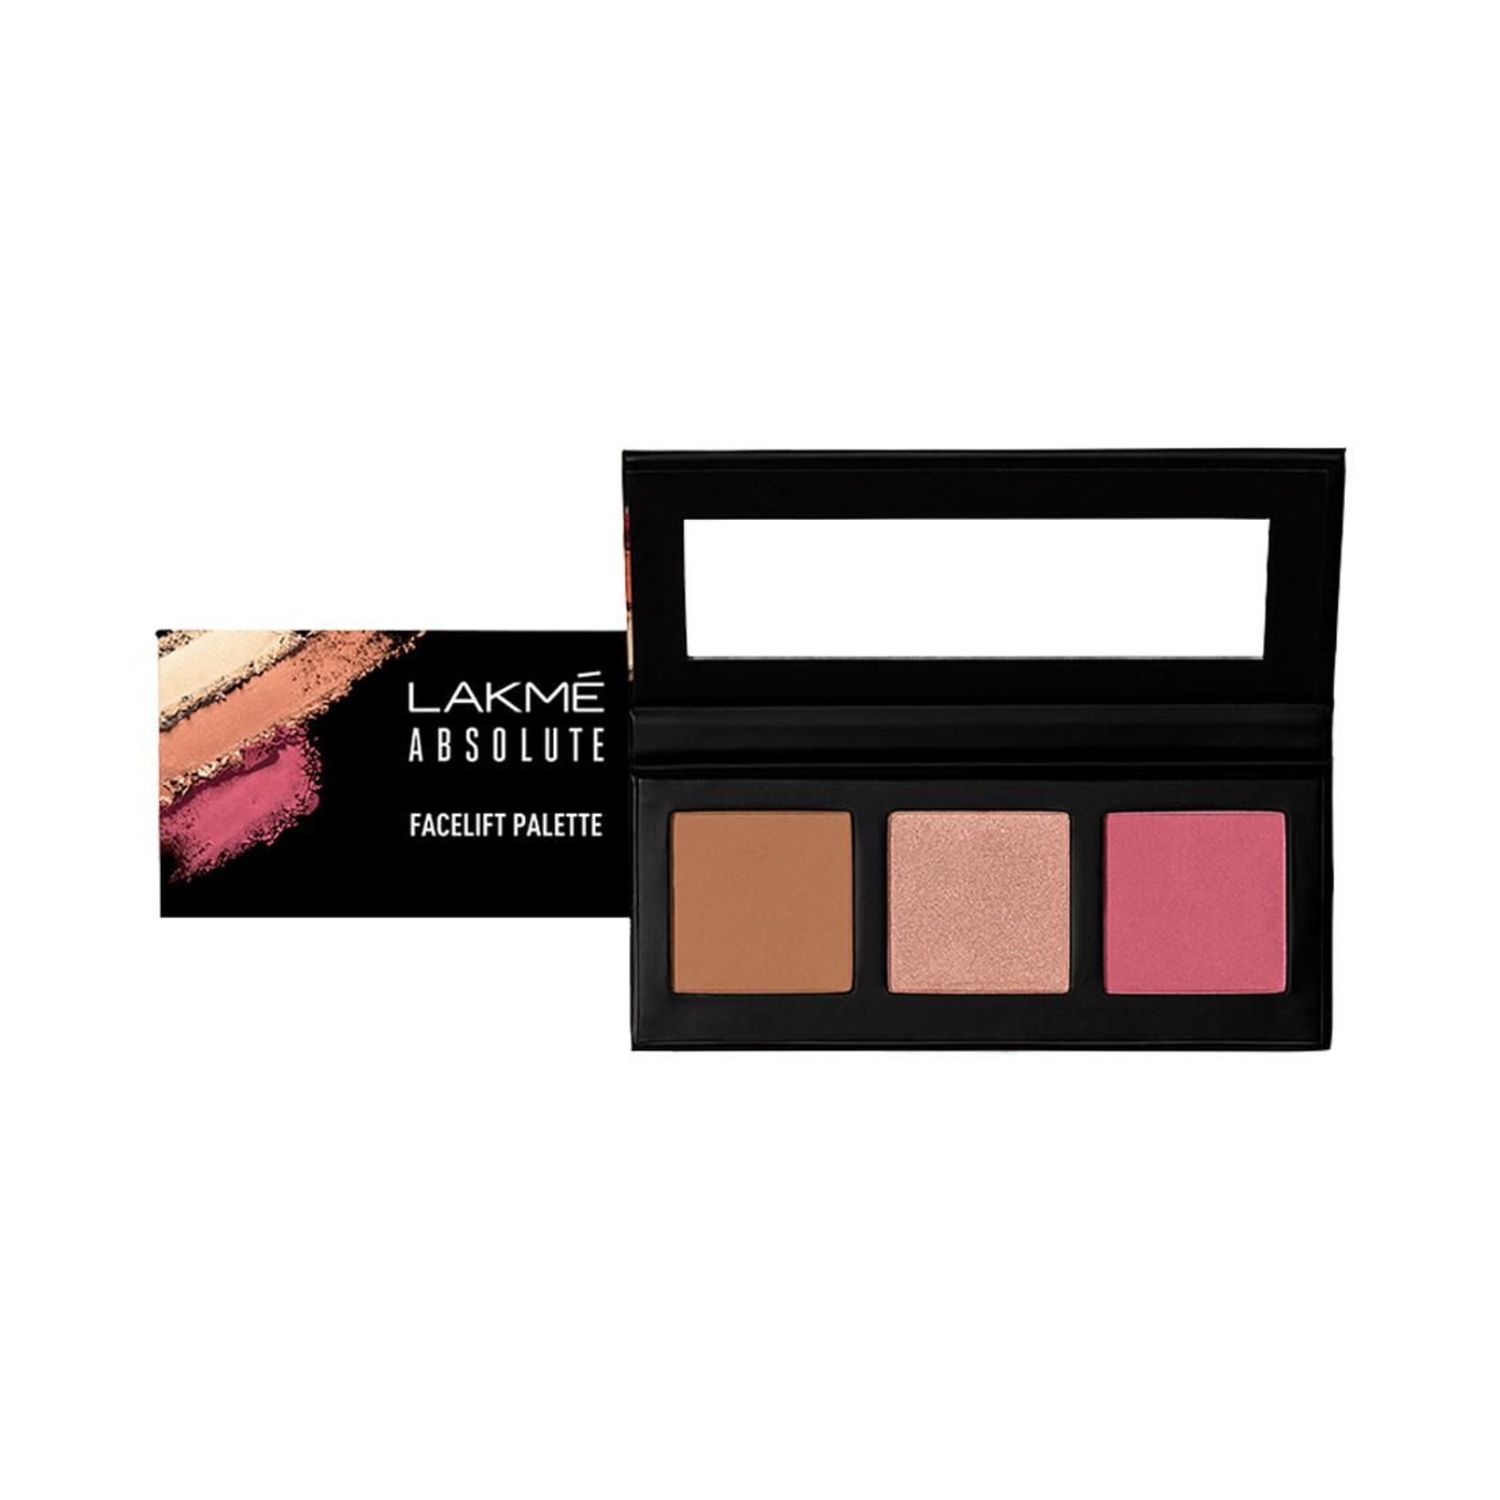 Lakme | Lakme Absolute Facelift Palette - Sunkissed Glow (15g)